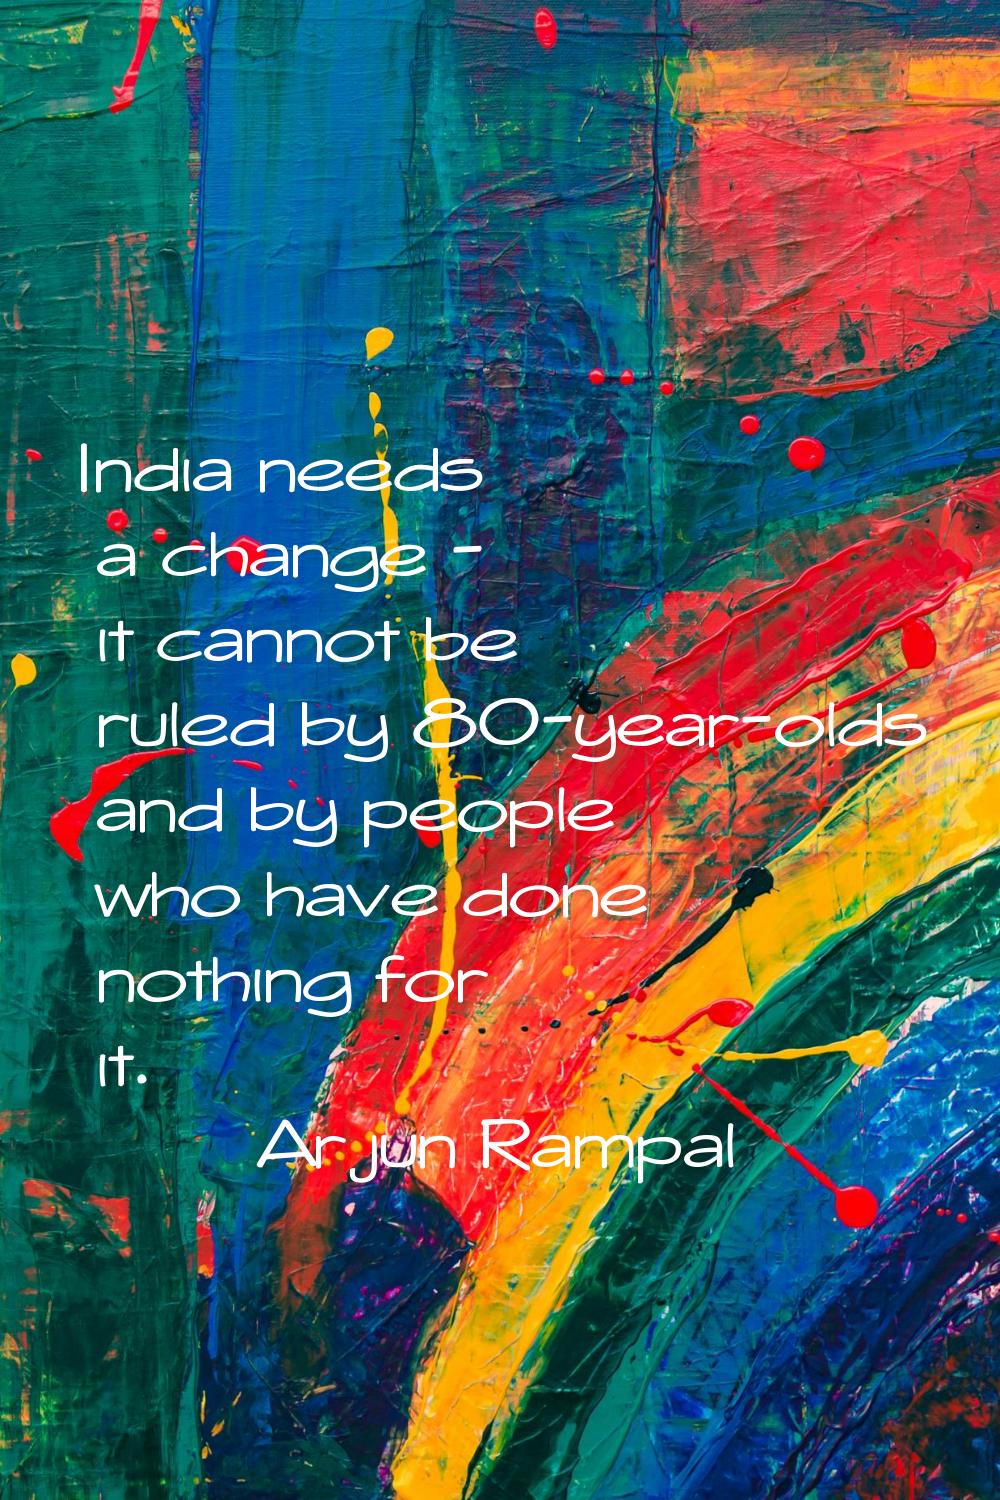 India needs a change - it cannot be ruled by 80-year-olds and by people who have done nothing for i